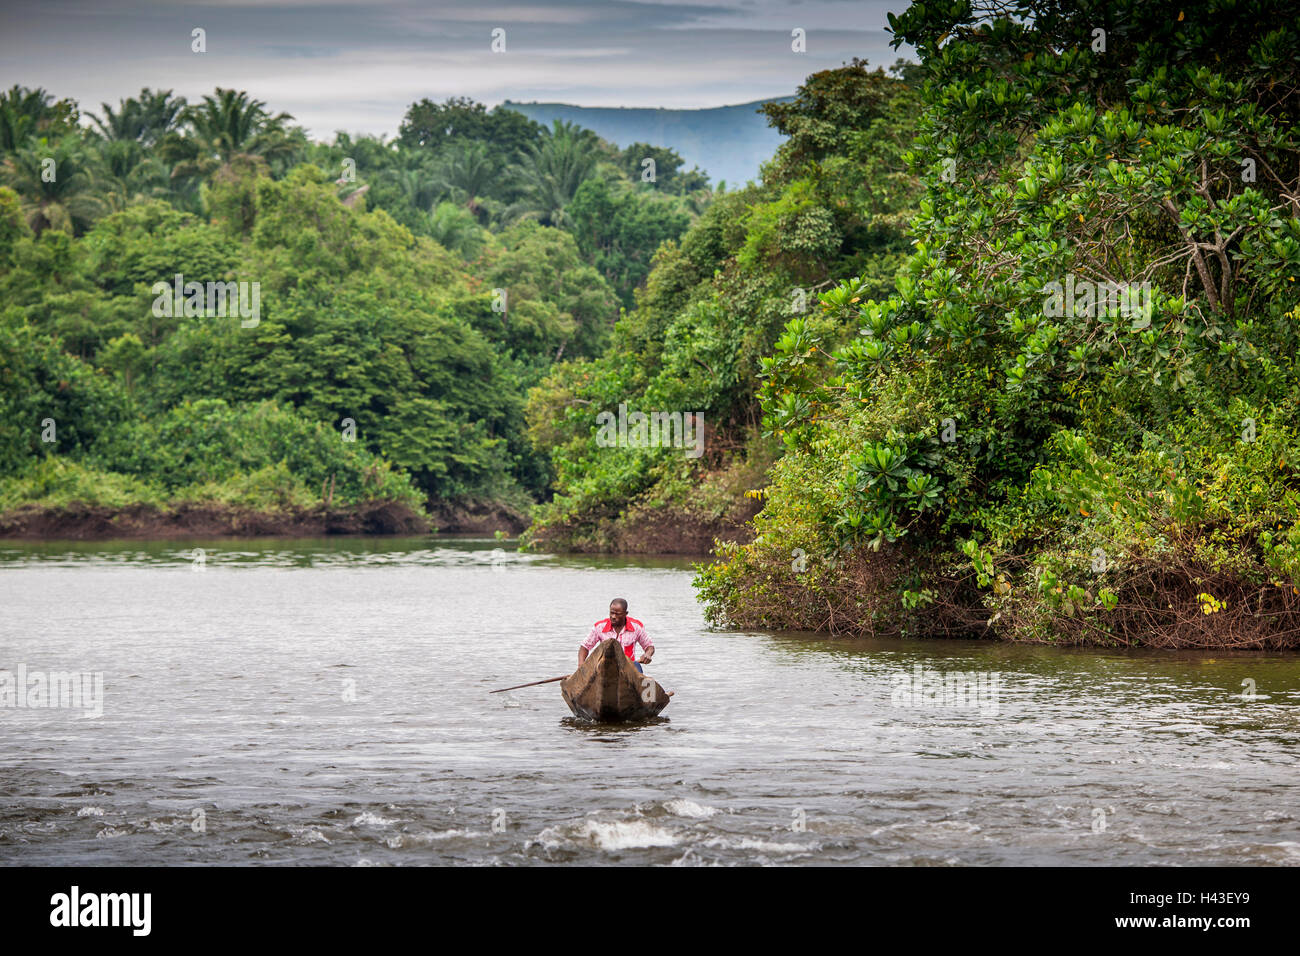 Man in dugout canoe, navigating river, Foumbam, West Region, Cameroon, Africa Stock Photo